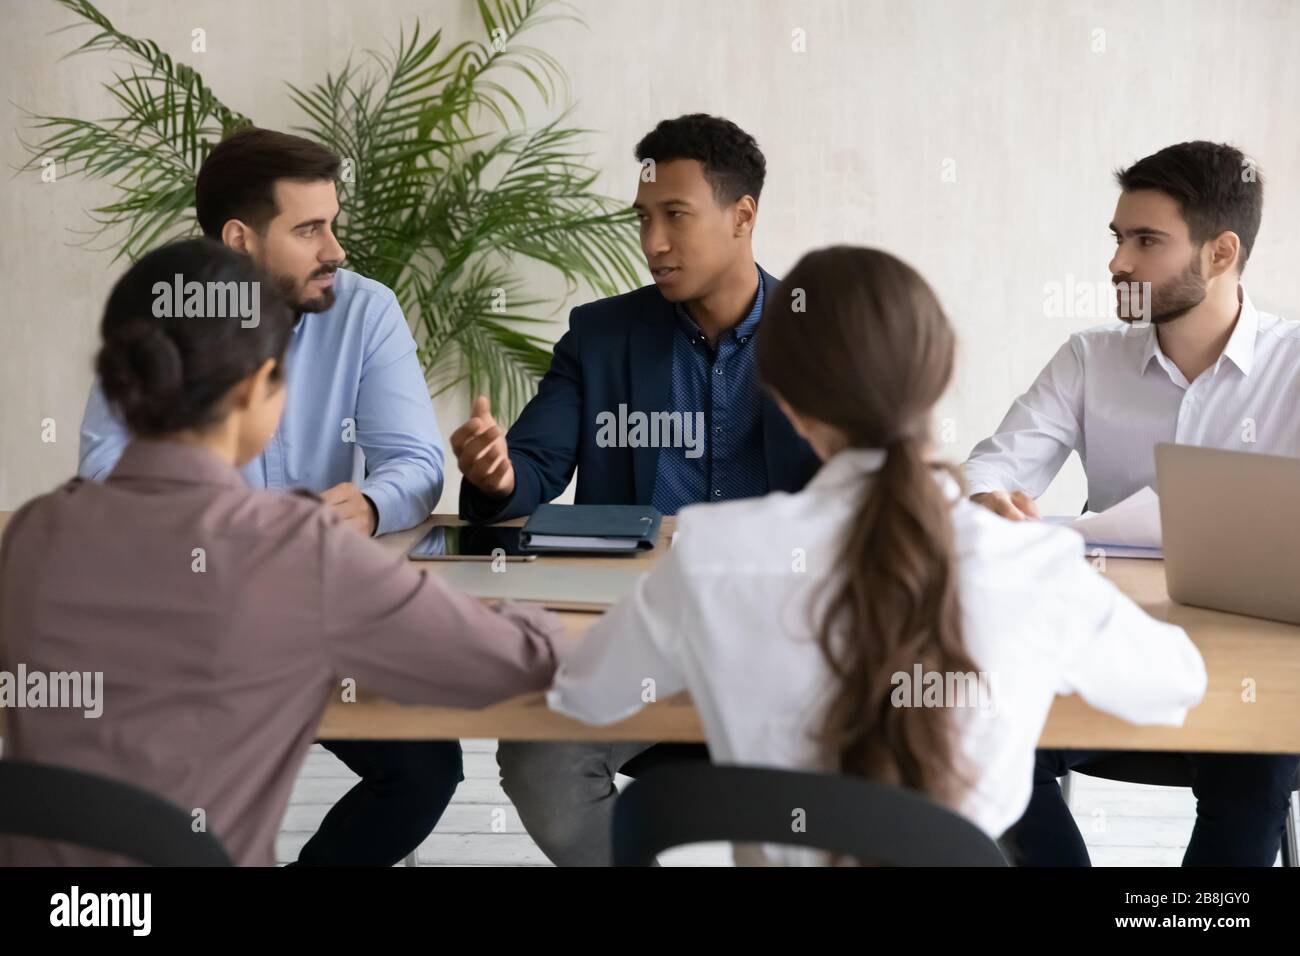 Focused diverse businesspeople brainstorm at office meeting Stock Photo